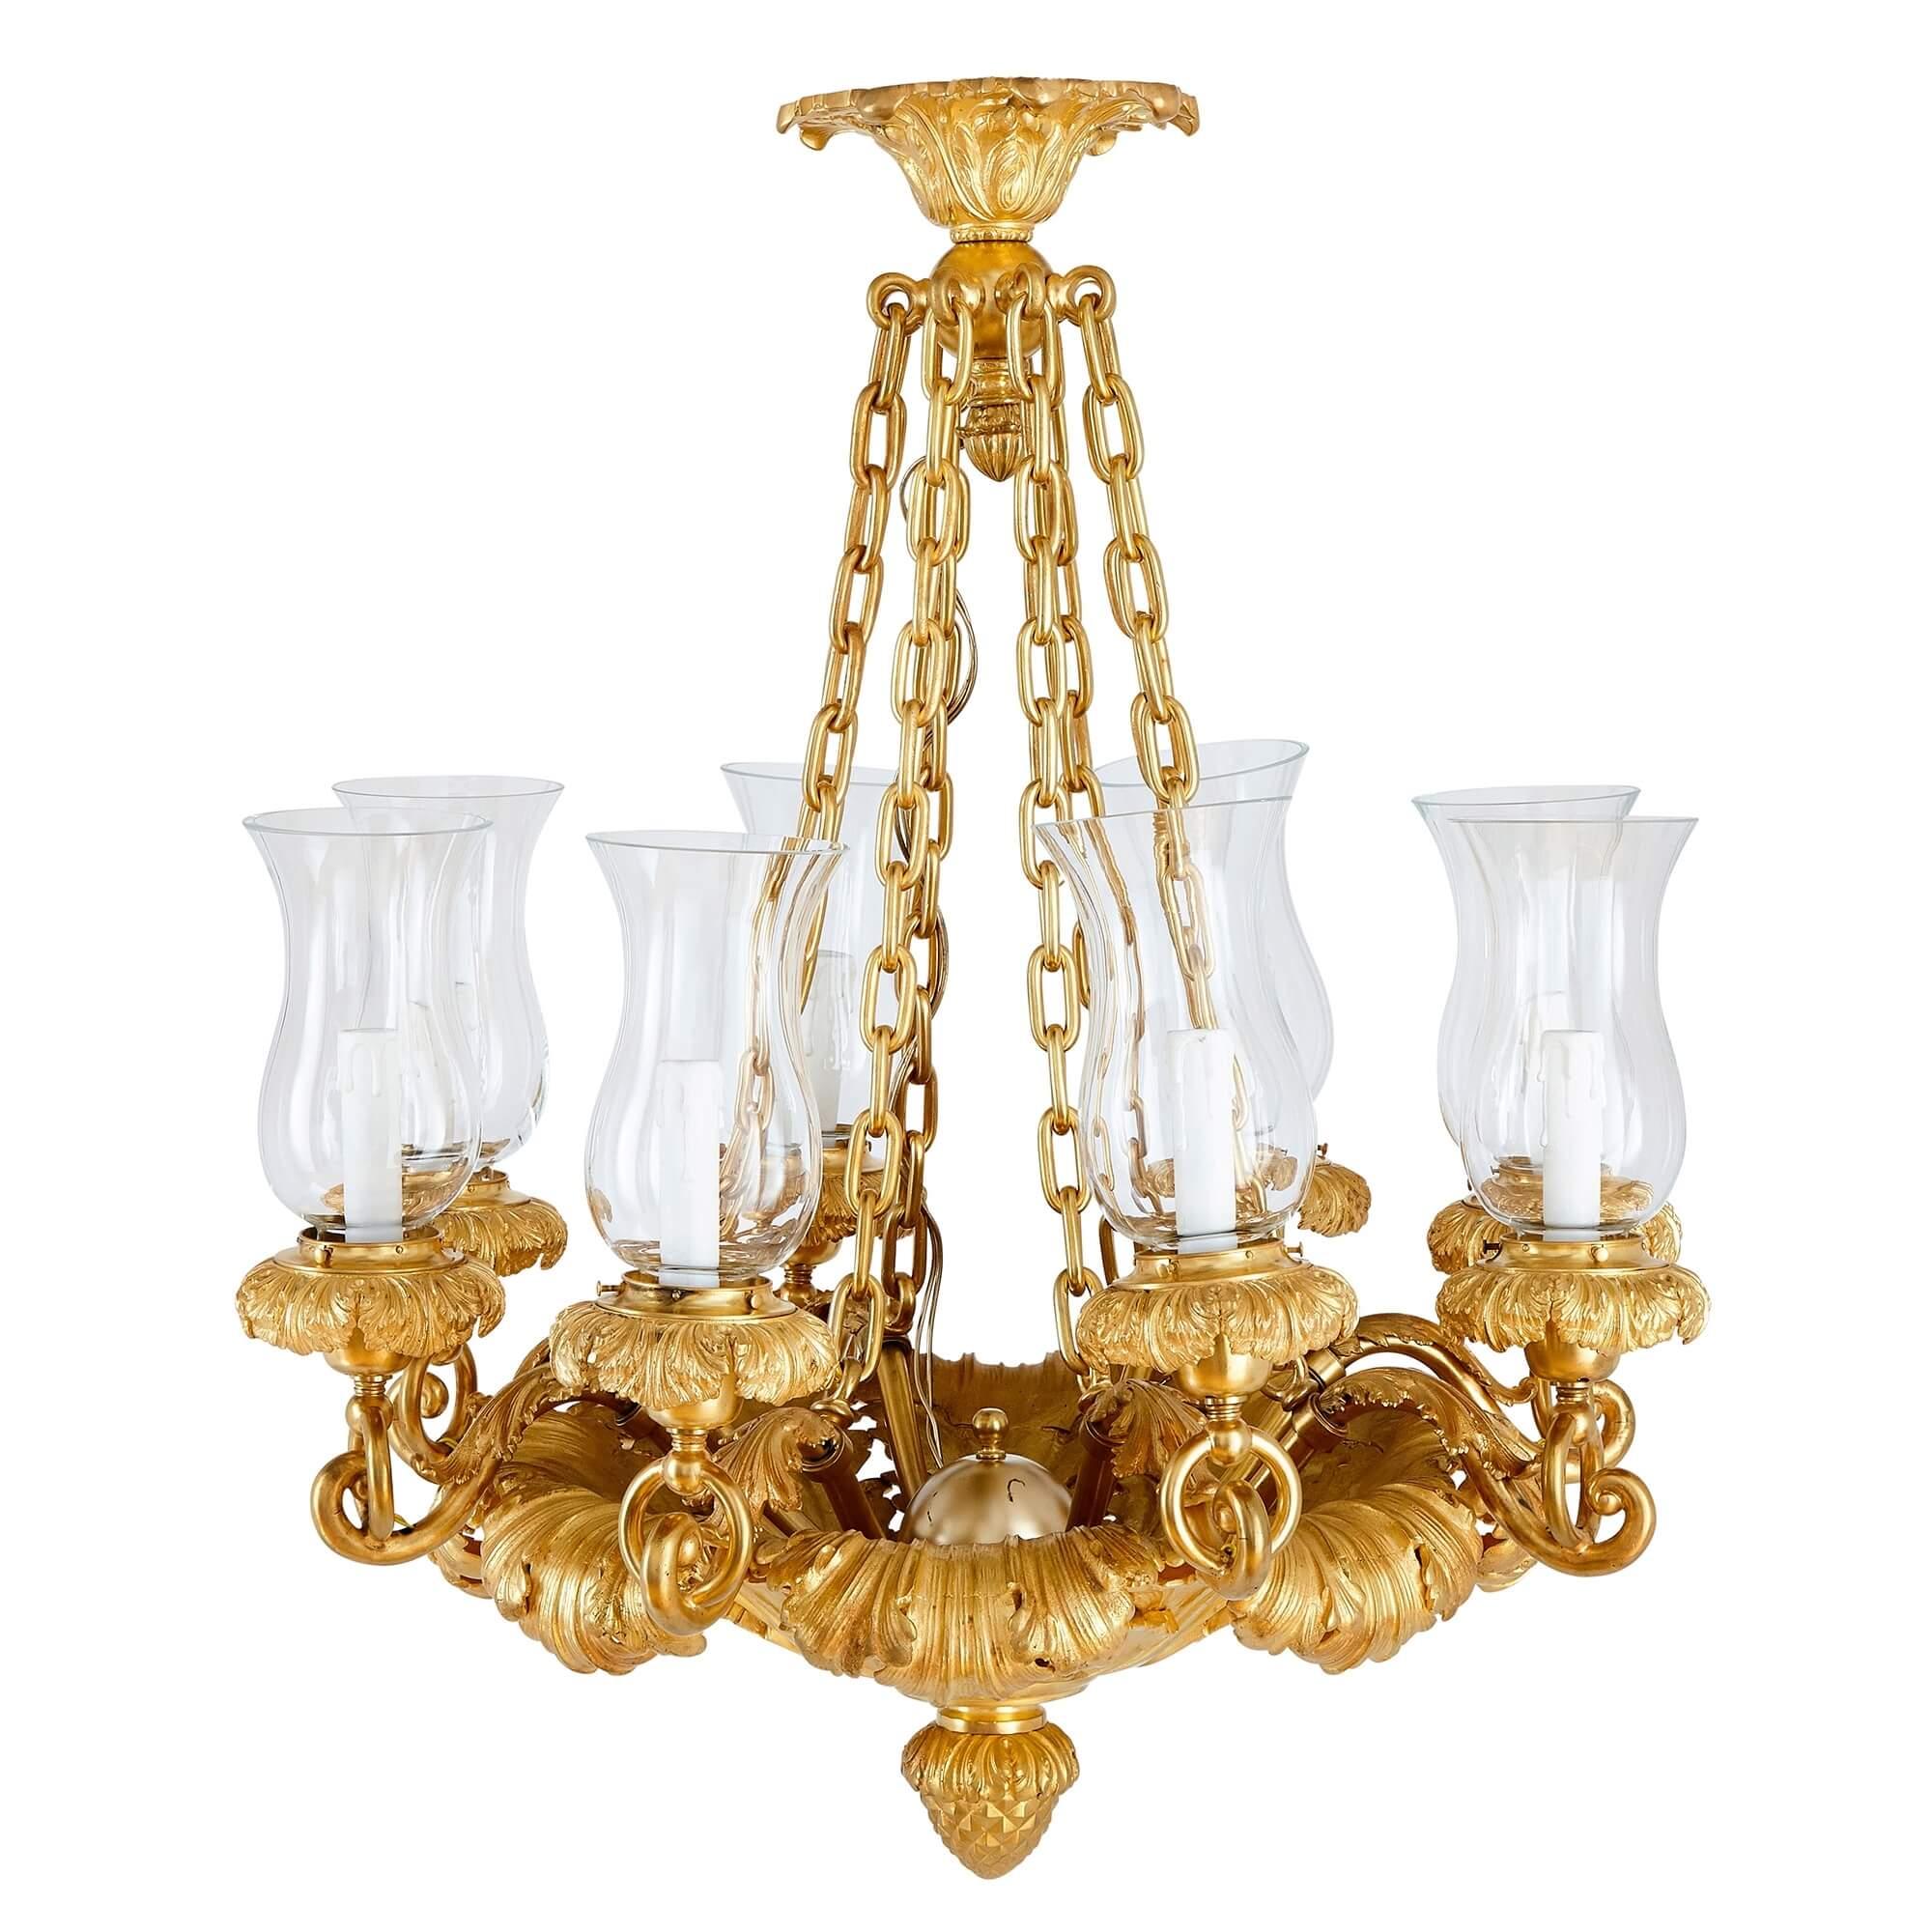 Antique French gilt bronze Louis Philippe chandelier
French, c. 1840
Measures: Height 86cm, diameter 73cm

This beautiful chandelier is designed in the ornate style that prevailed during the reign of Louis Philippe, King of the French, from 1830